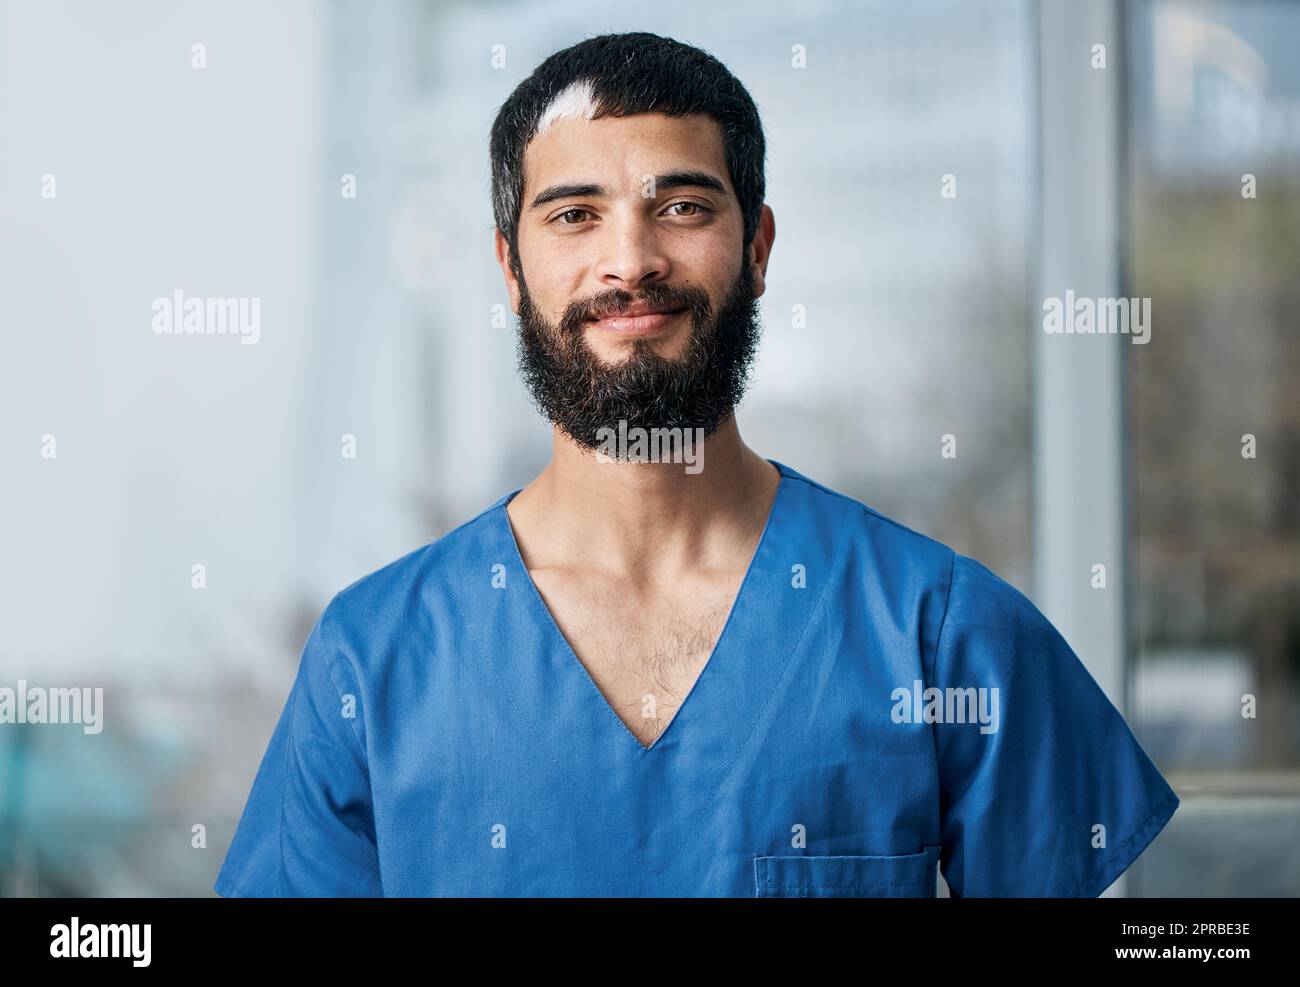 Professional skills and good character make for an exceptional doctor. Portrait of a medical practitioner standing in a hospital. Stock Photo